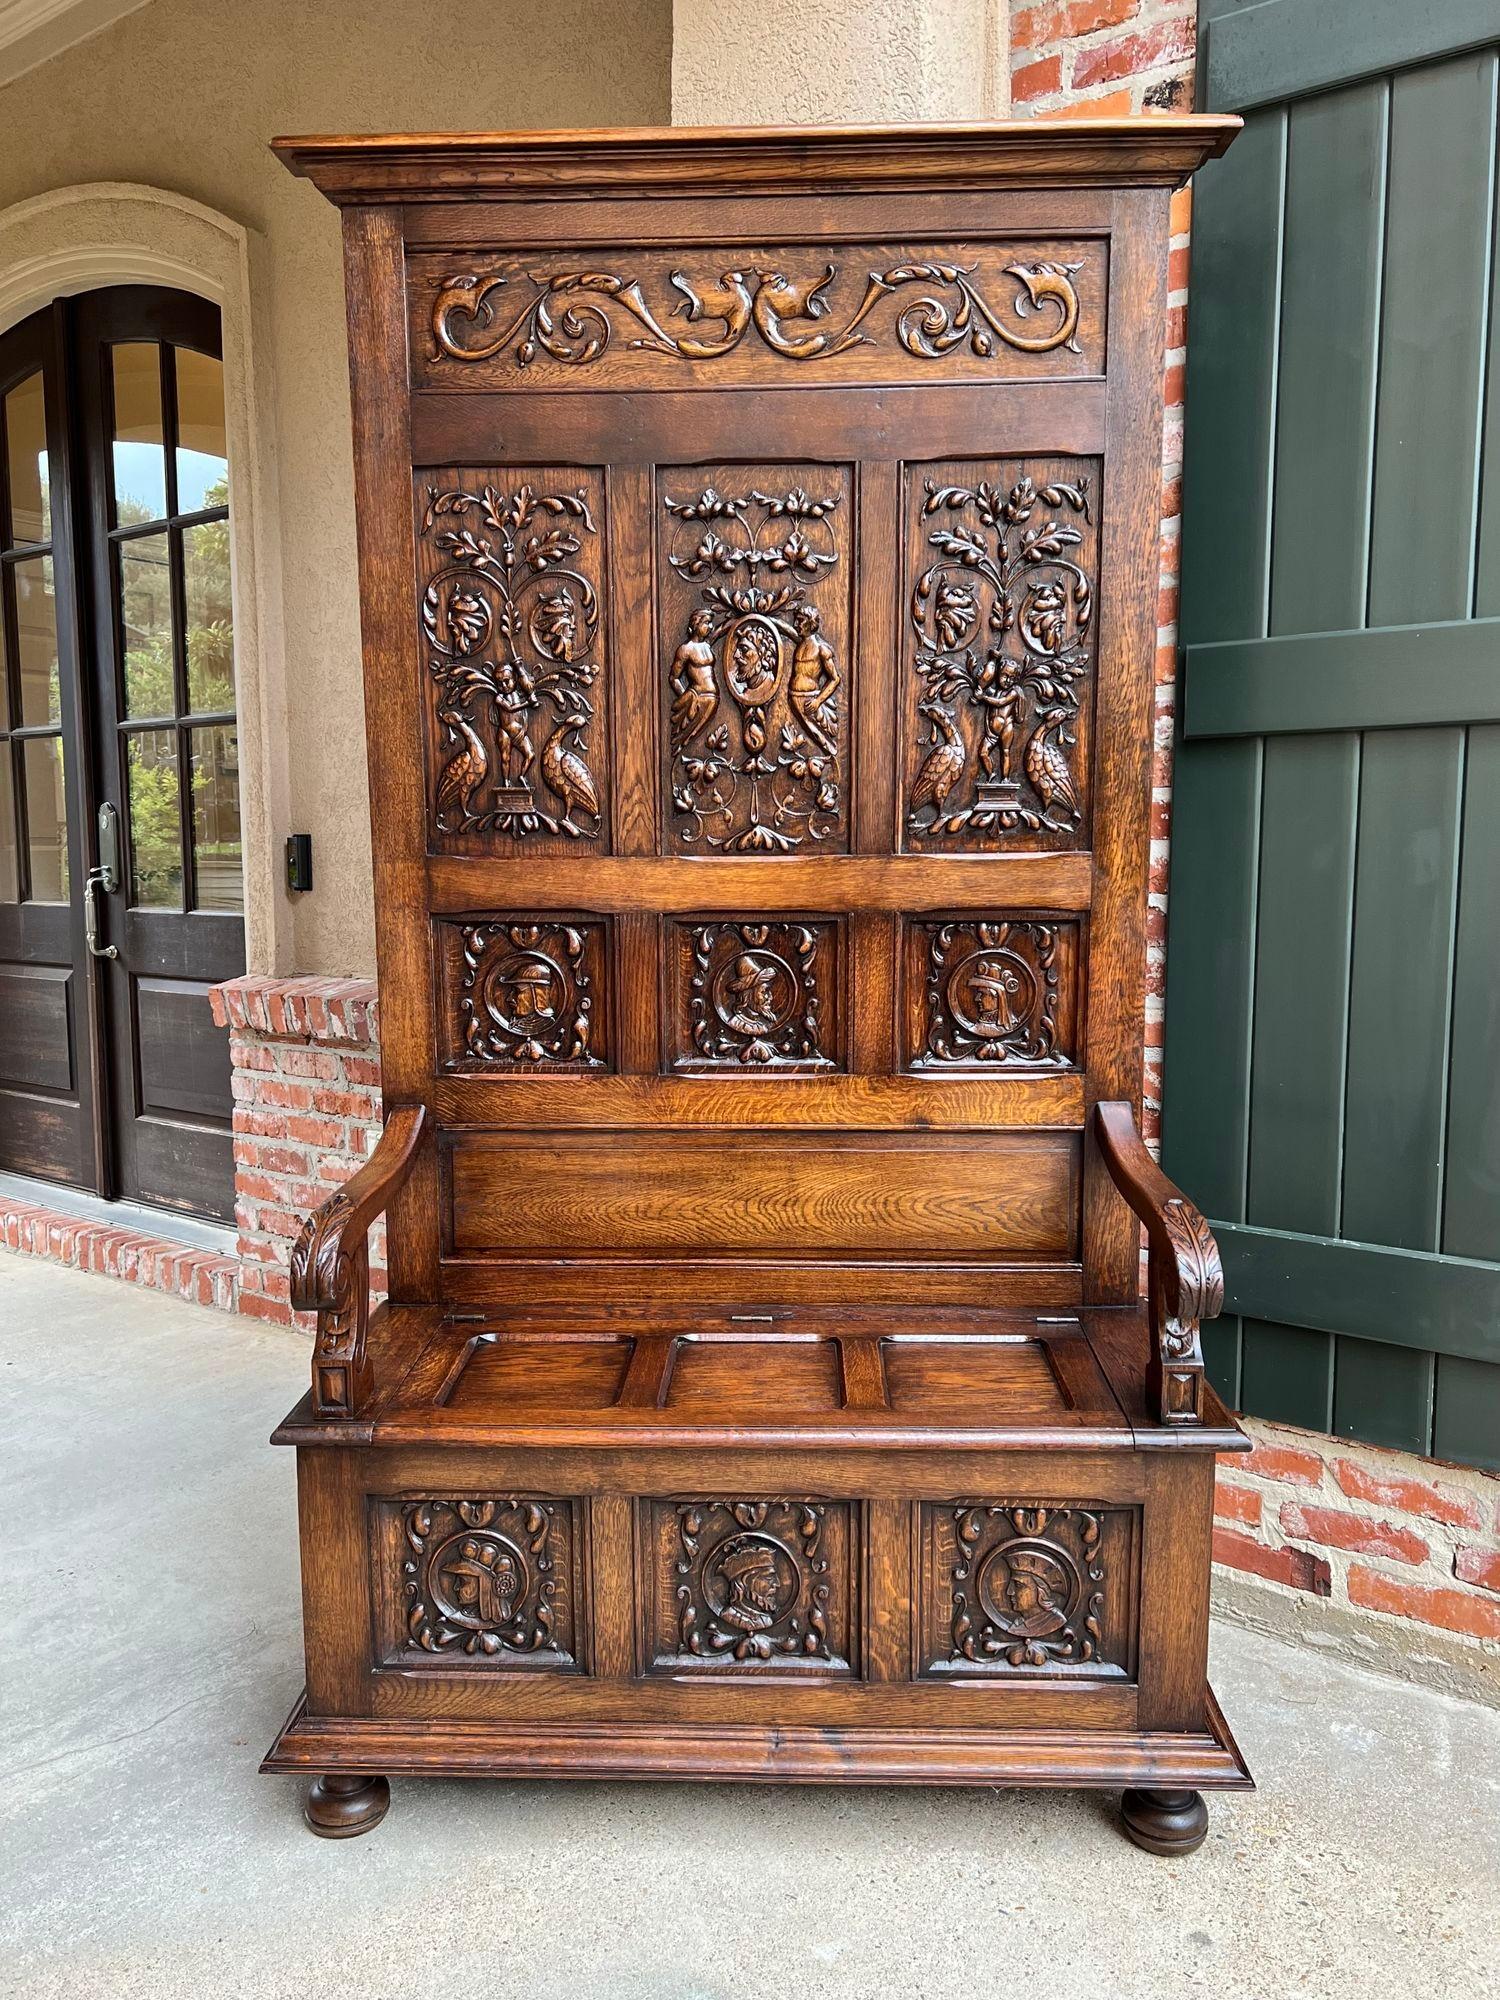 19th century French hall bench settle renaissance carved oak Breton Brittany.

Direct from France, a massive antique French hall bench, large enough for any home or castle! The 6.5 ft. back features an upper panel of mythic creatures above three